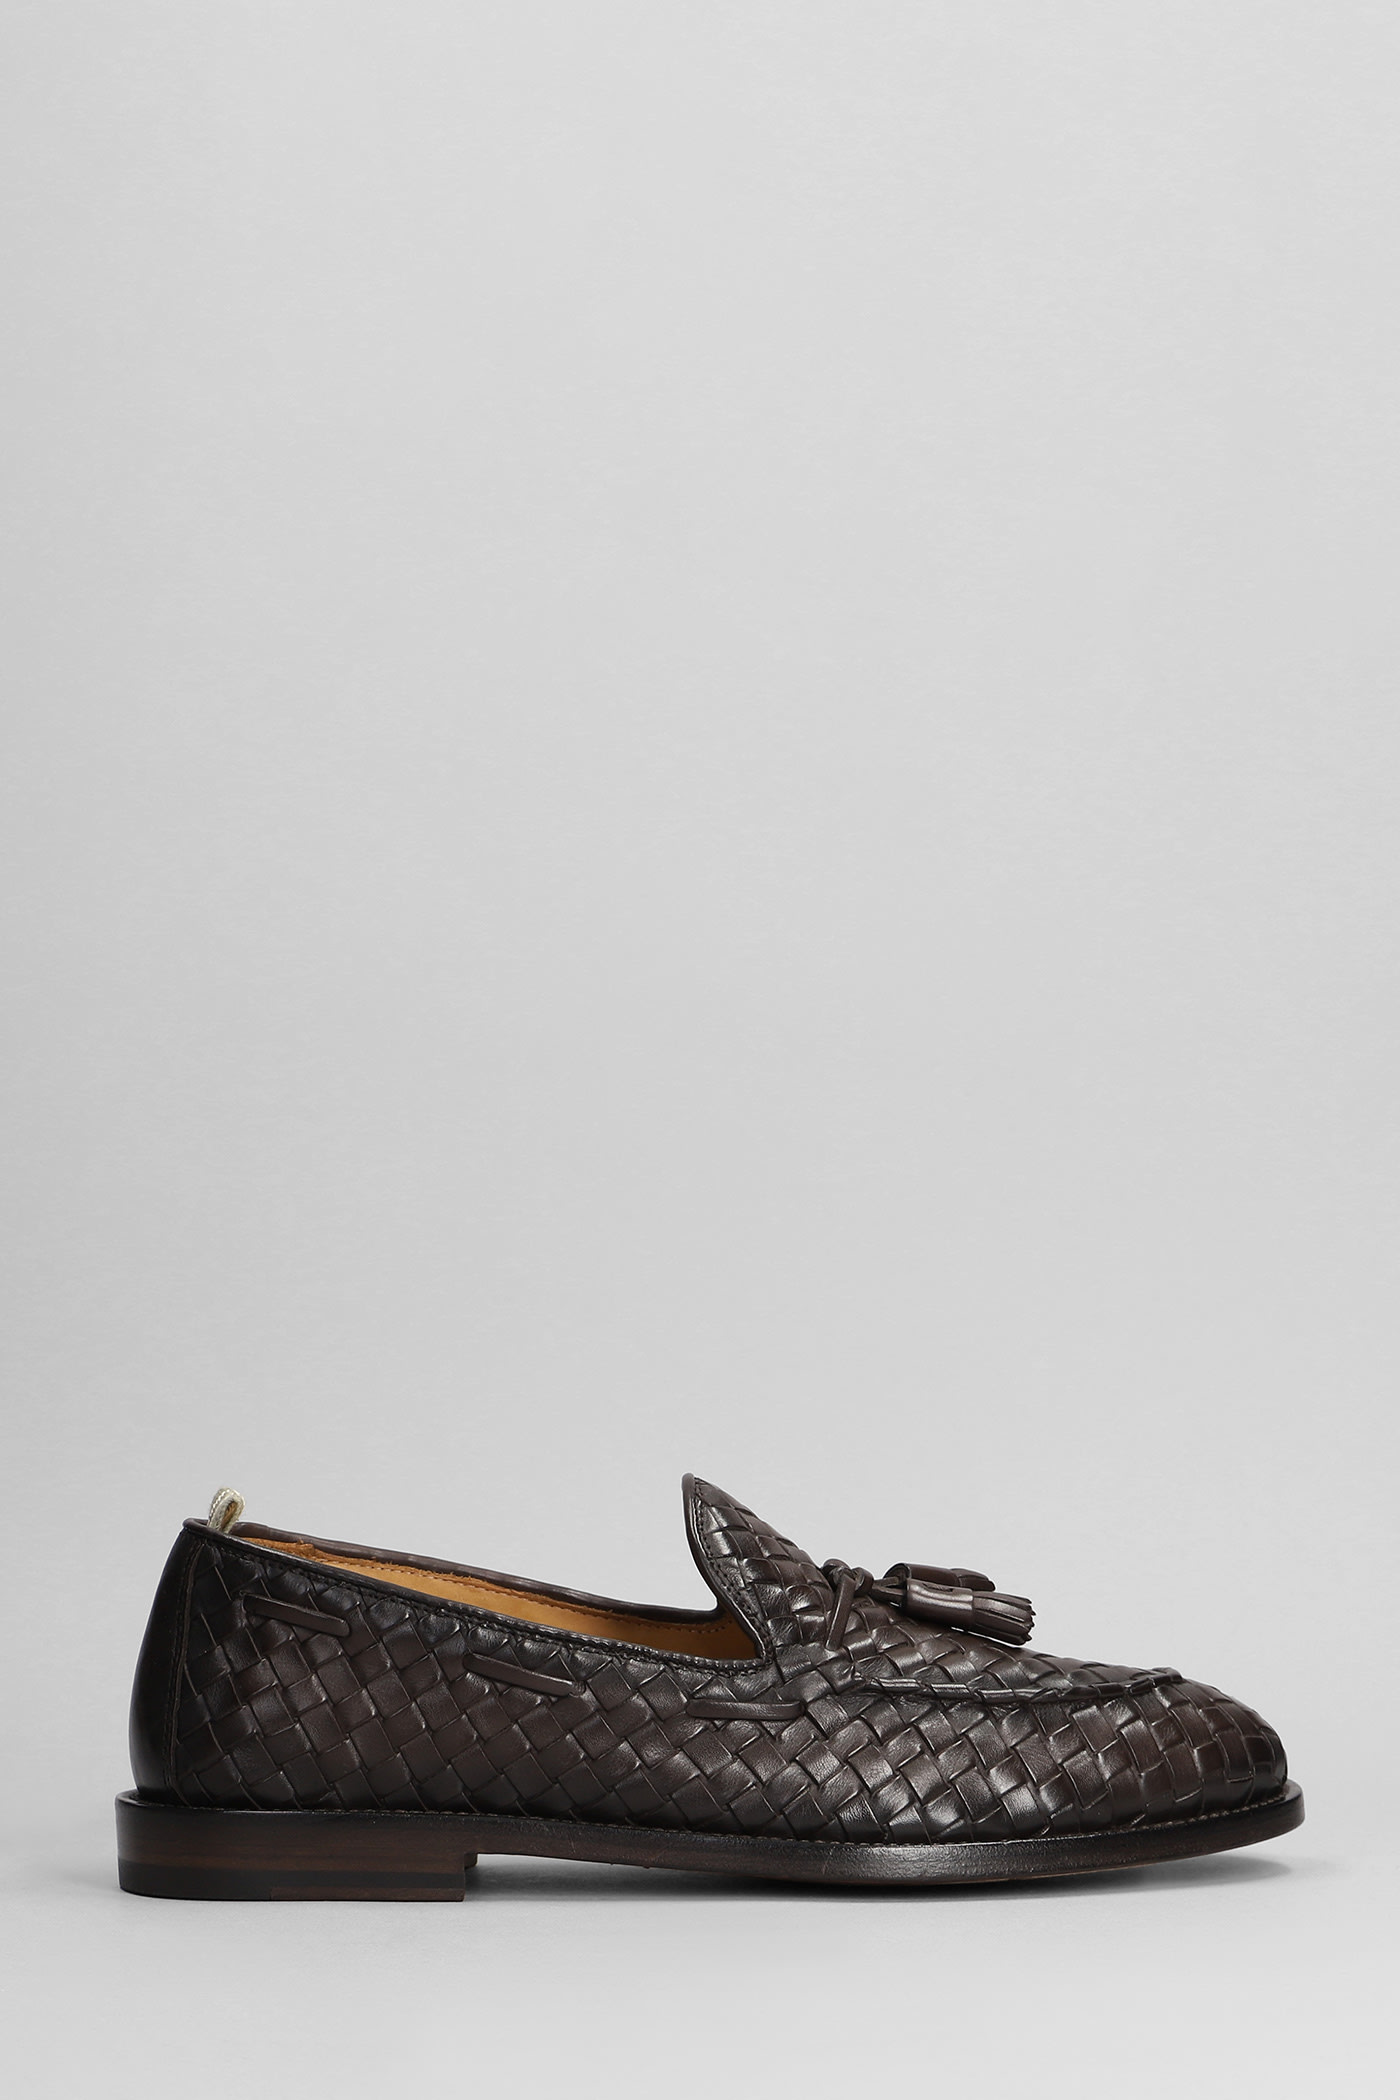 OFFICINE CREATIVE OPERA 004 LOAFERS IN BROWN LEATHER